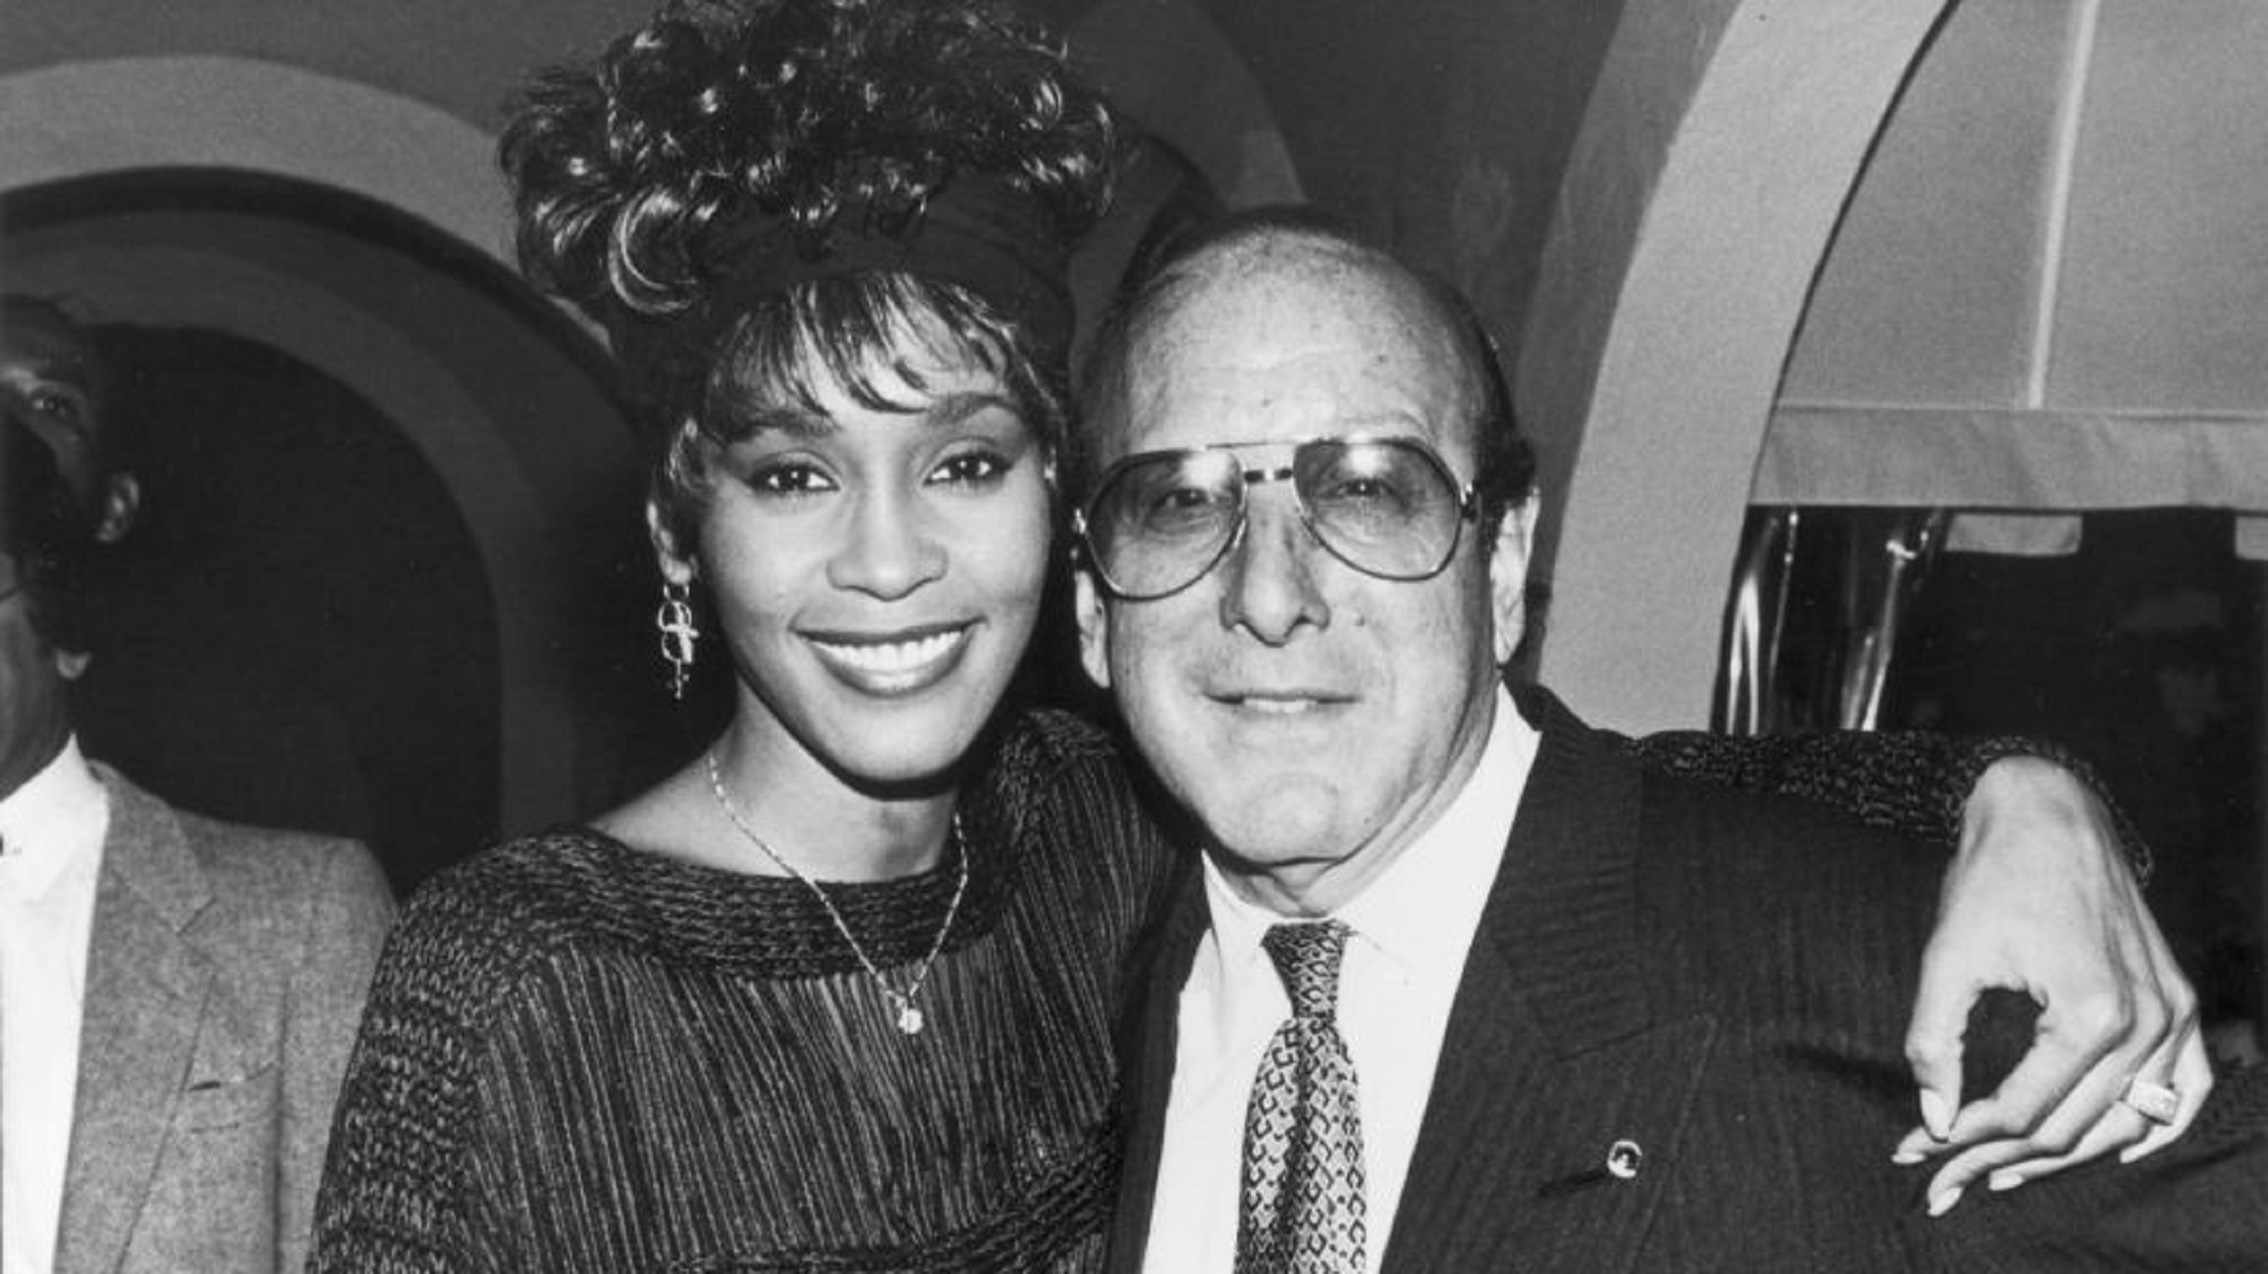 Clive Davis: “New Whitney Houston Film Will Be Musically Rich, Will Show More Than We Have Seen To Date”